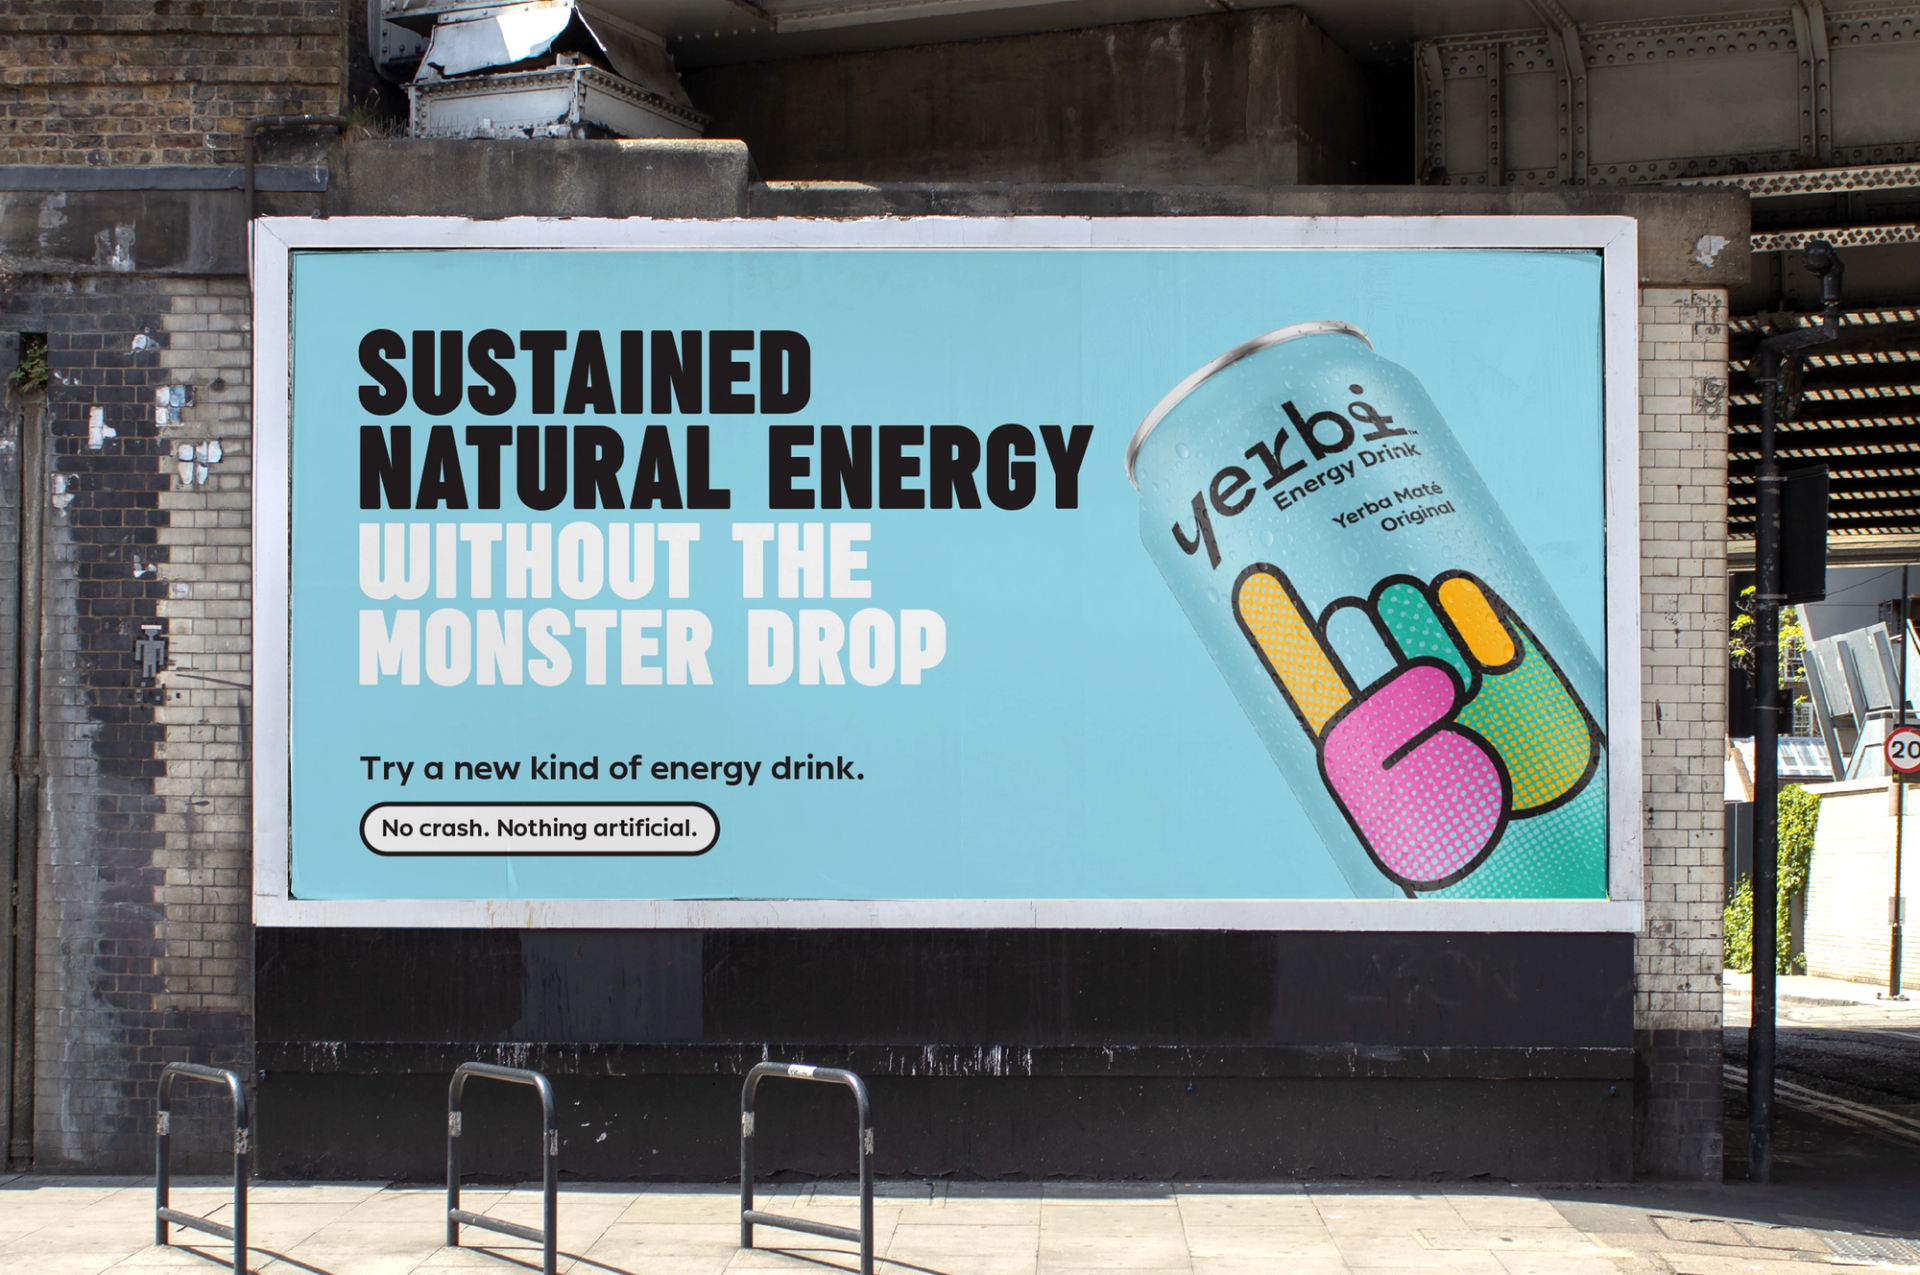 Billboard advert for Yerbi Energy drink brand design by Our Revolution featuring slogan “sustained natural energy without the monster drop” Jen Doran